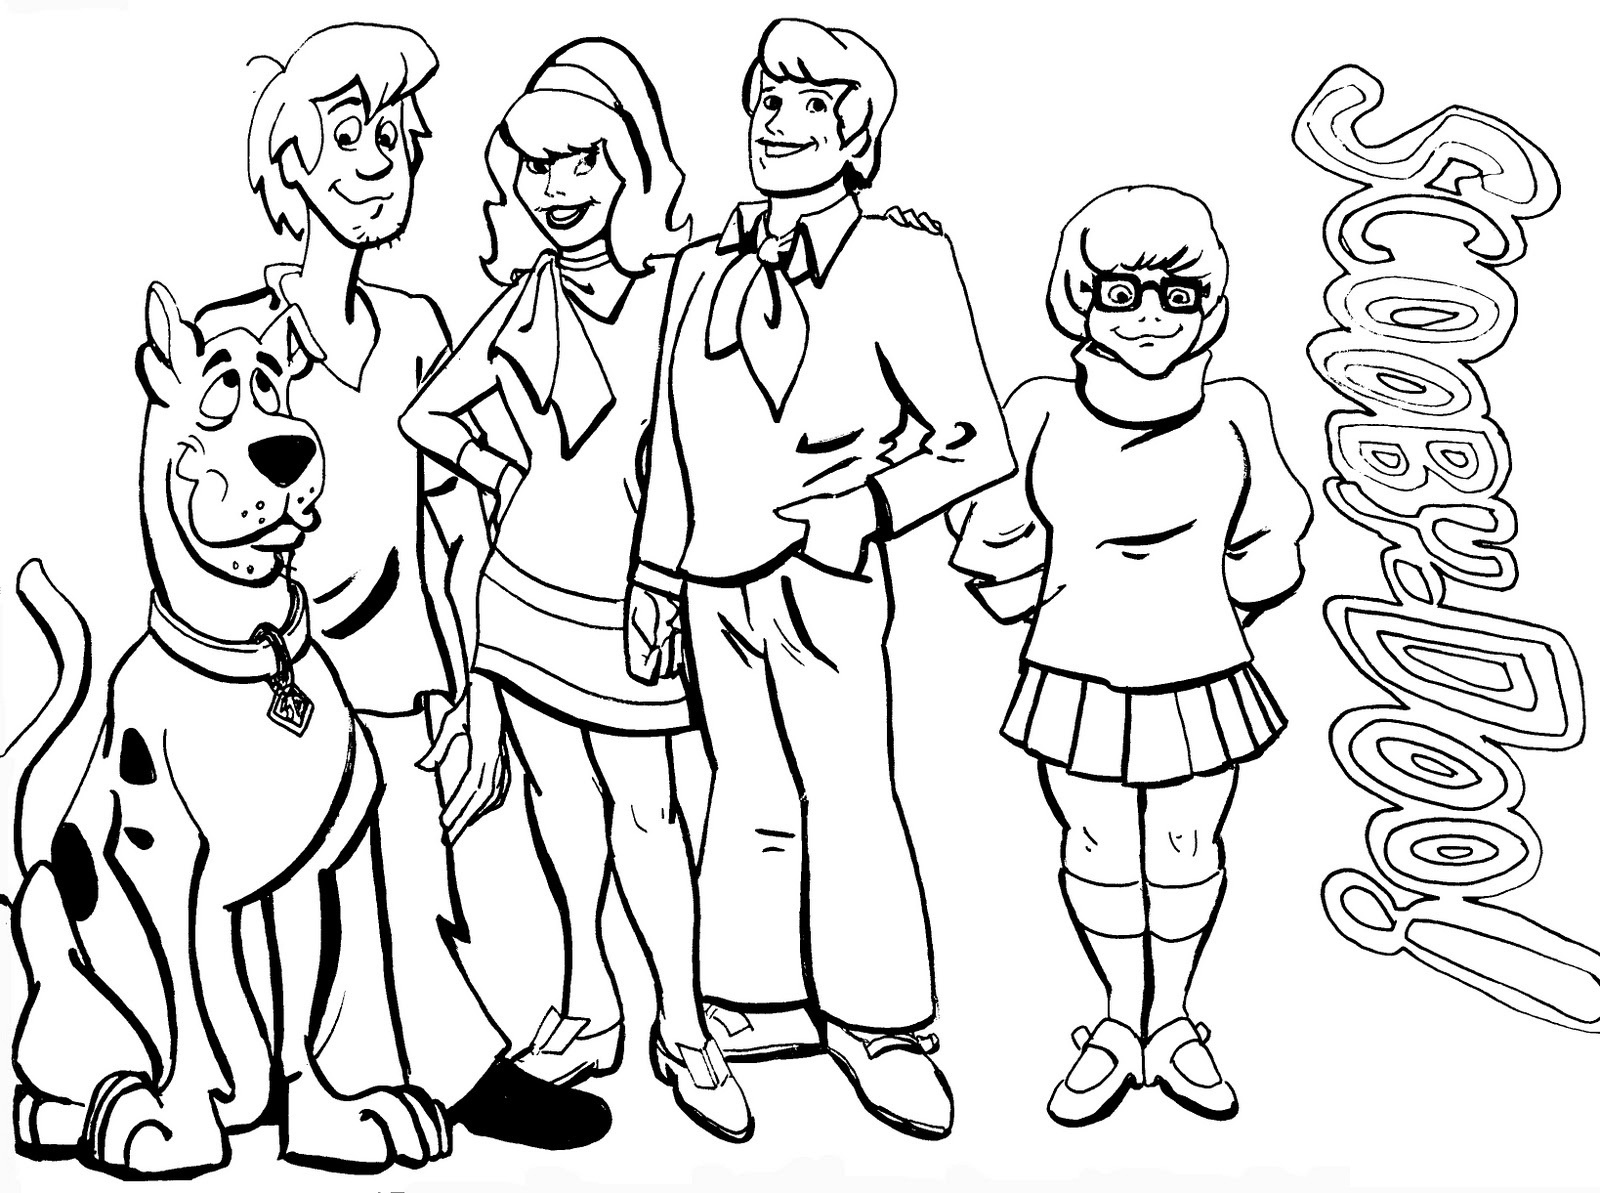 Scooby Doo Gang Coloring Page Coloring Home Free Printable Coloring